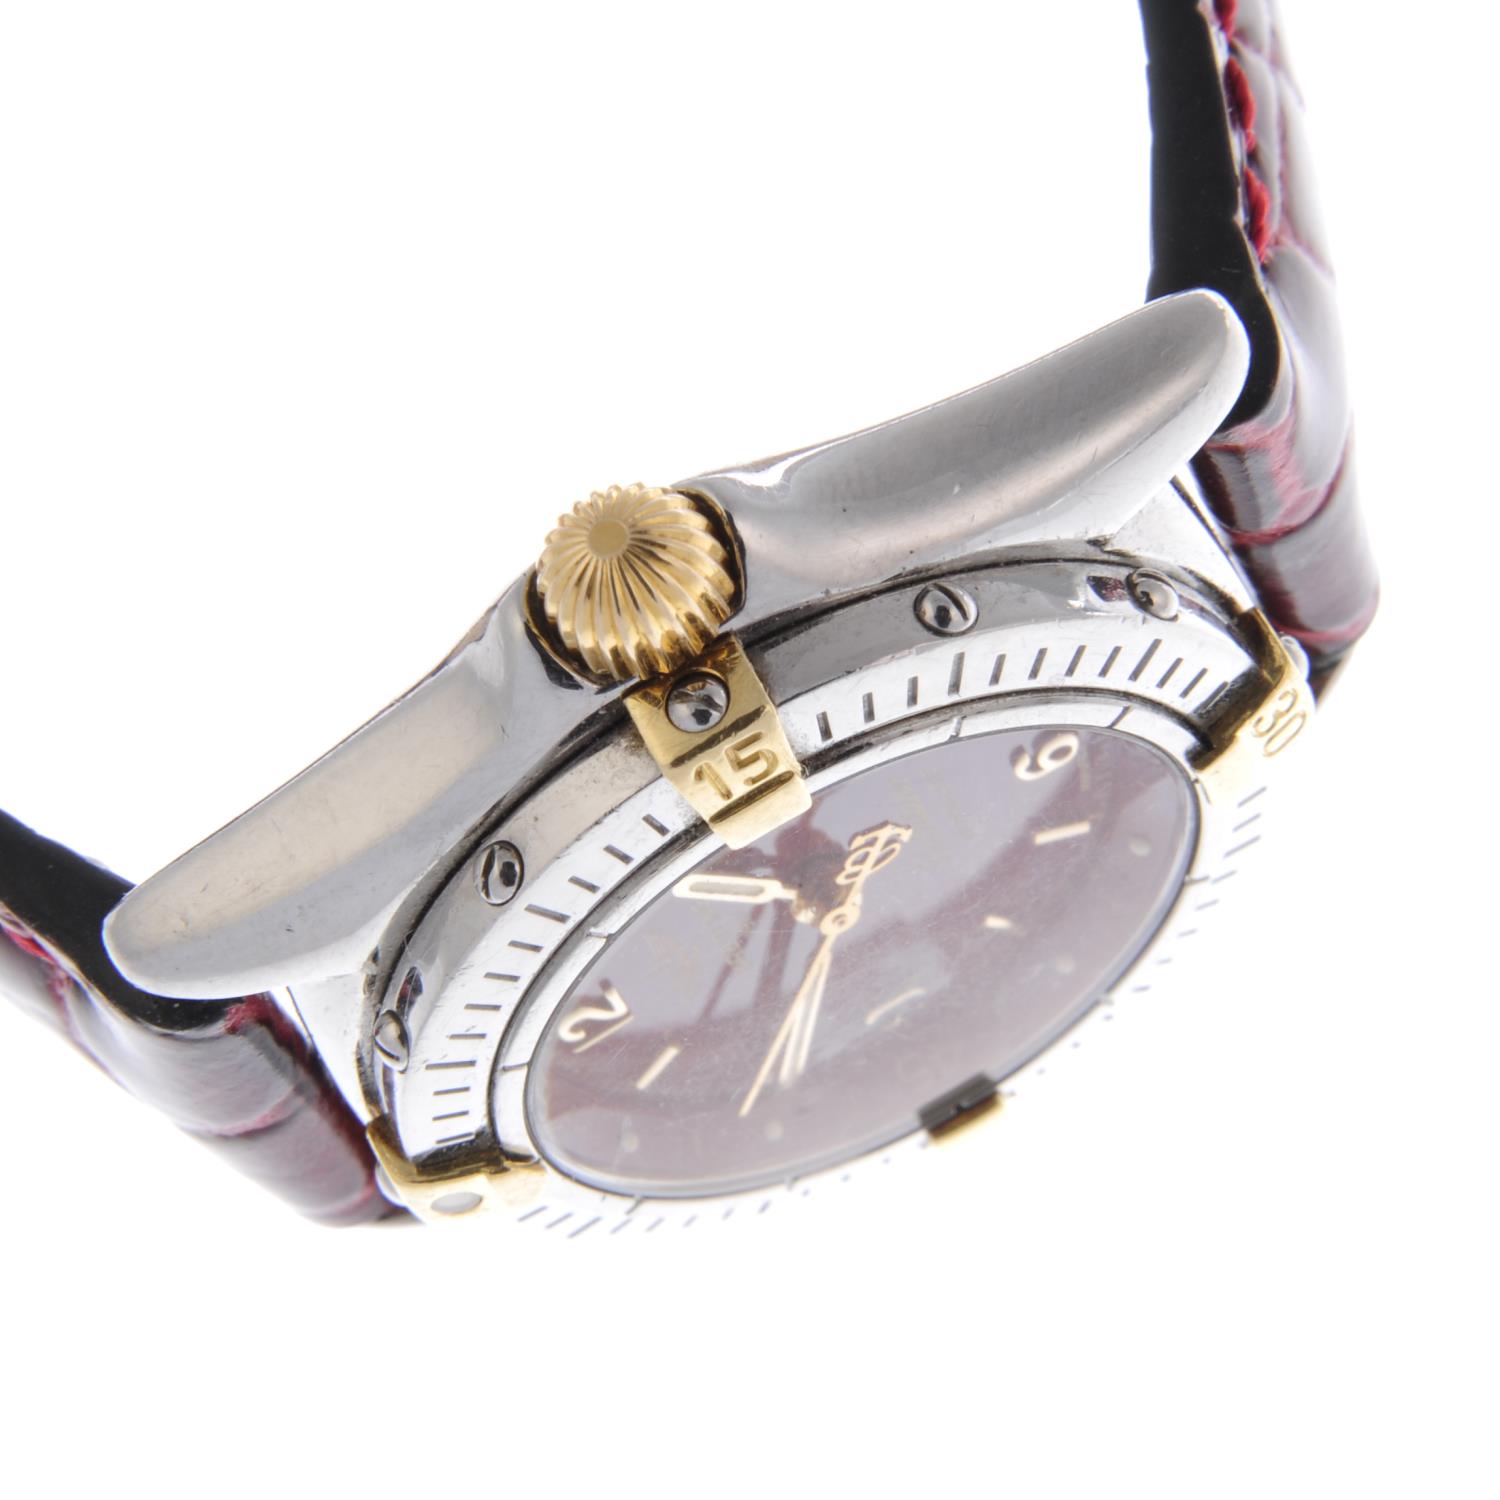 BREITLING - a lady's Callistino wrist watch. Stainless steel case with bi-metal calibrated bezel. - Image 5 of 5